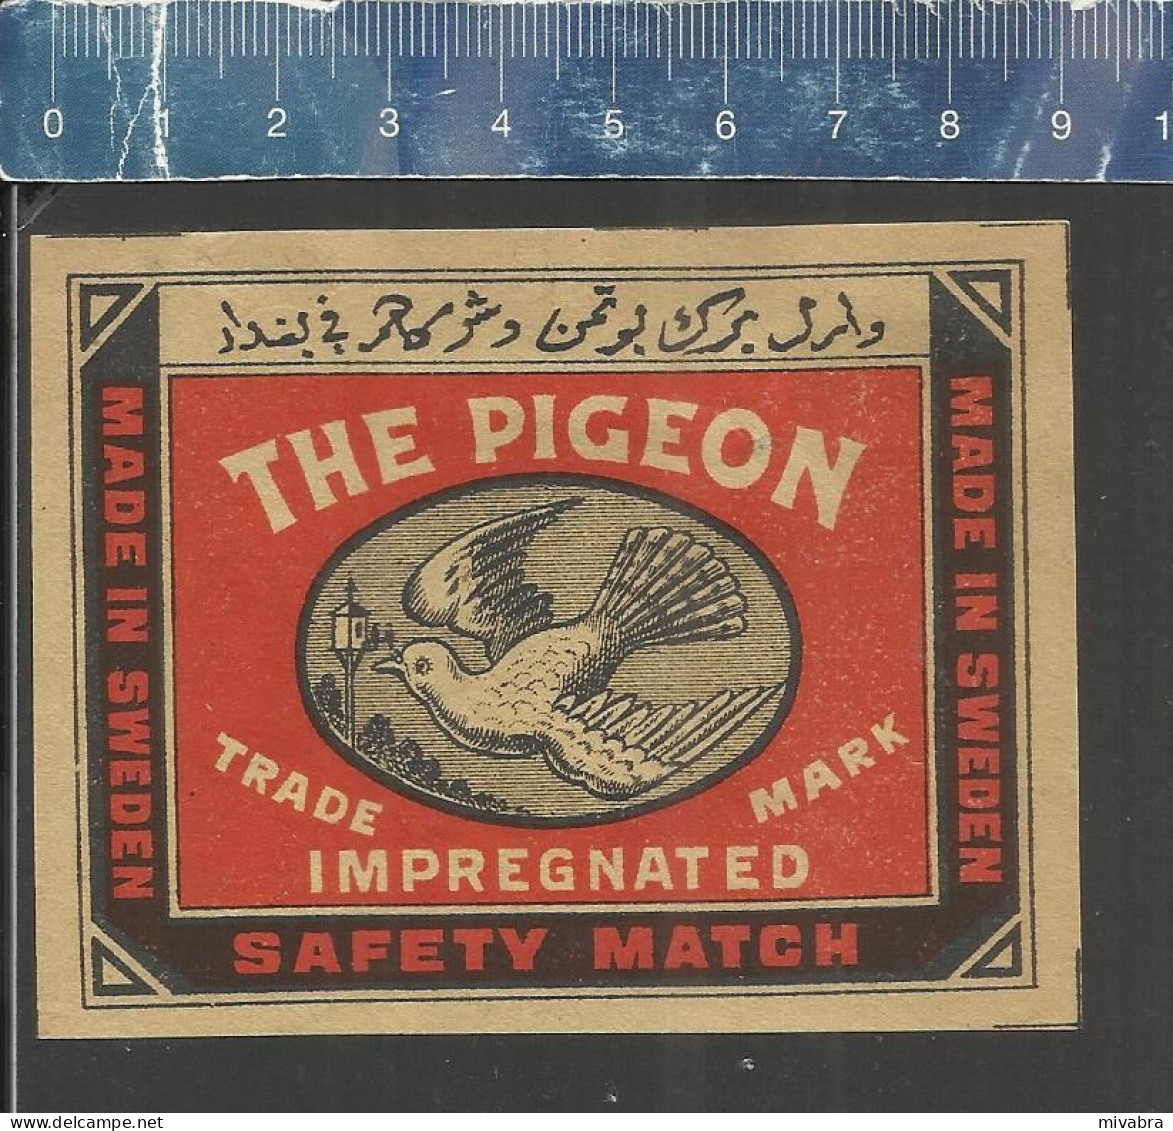 THE PIGEON  IMPREGNATED  SAFETY MATCH (PIGEONS - TAUBEN - DUIVEN PALOMA ) OLD  EXPORT MATCHBOX LABEL MADE IN SWEDEN - Boites D'allumettes - Etiquettes